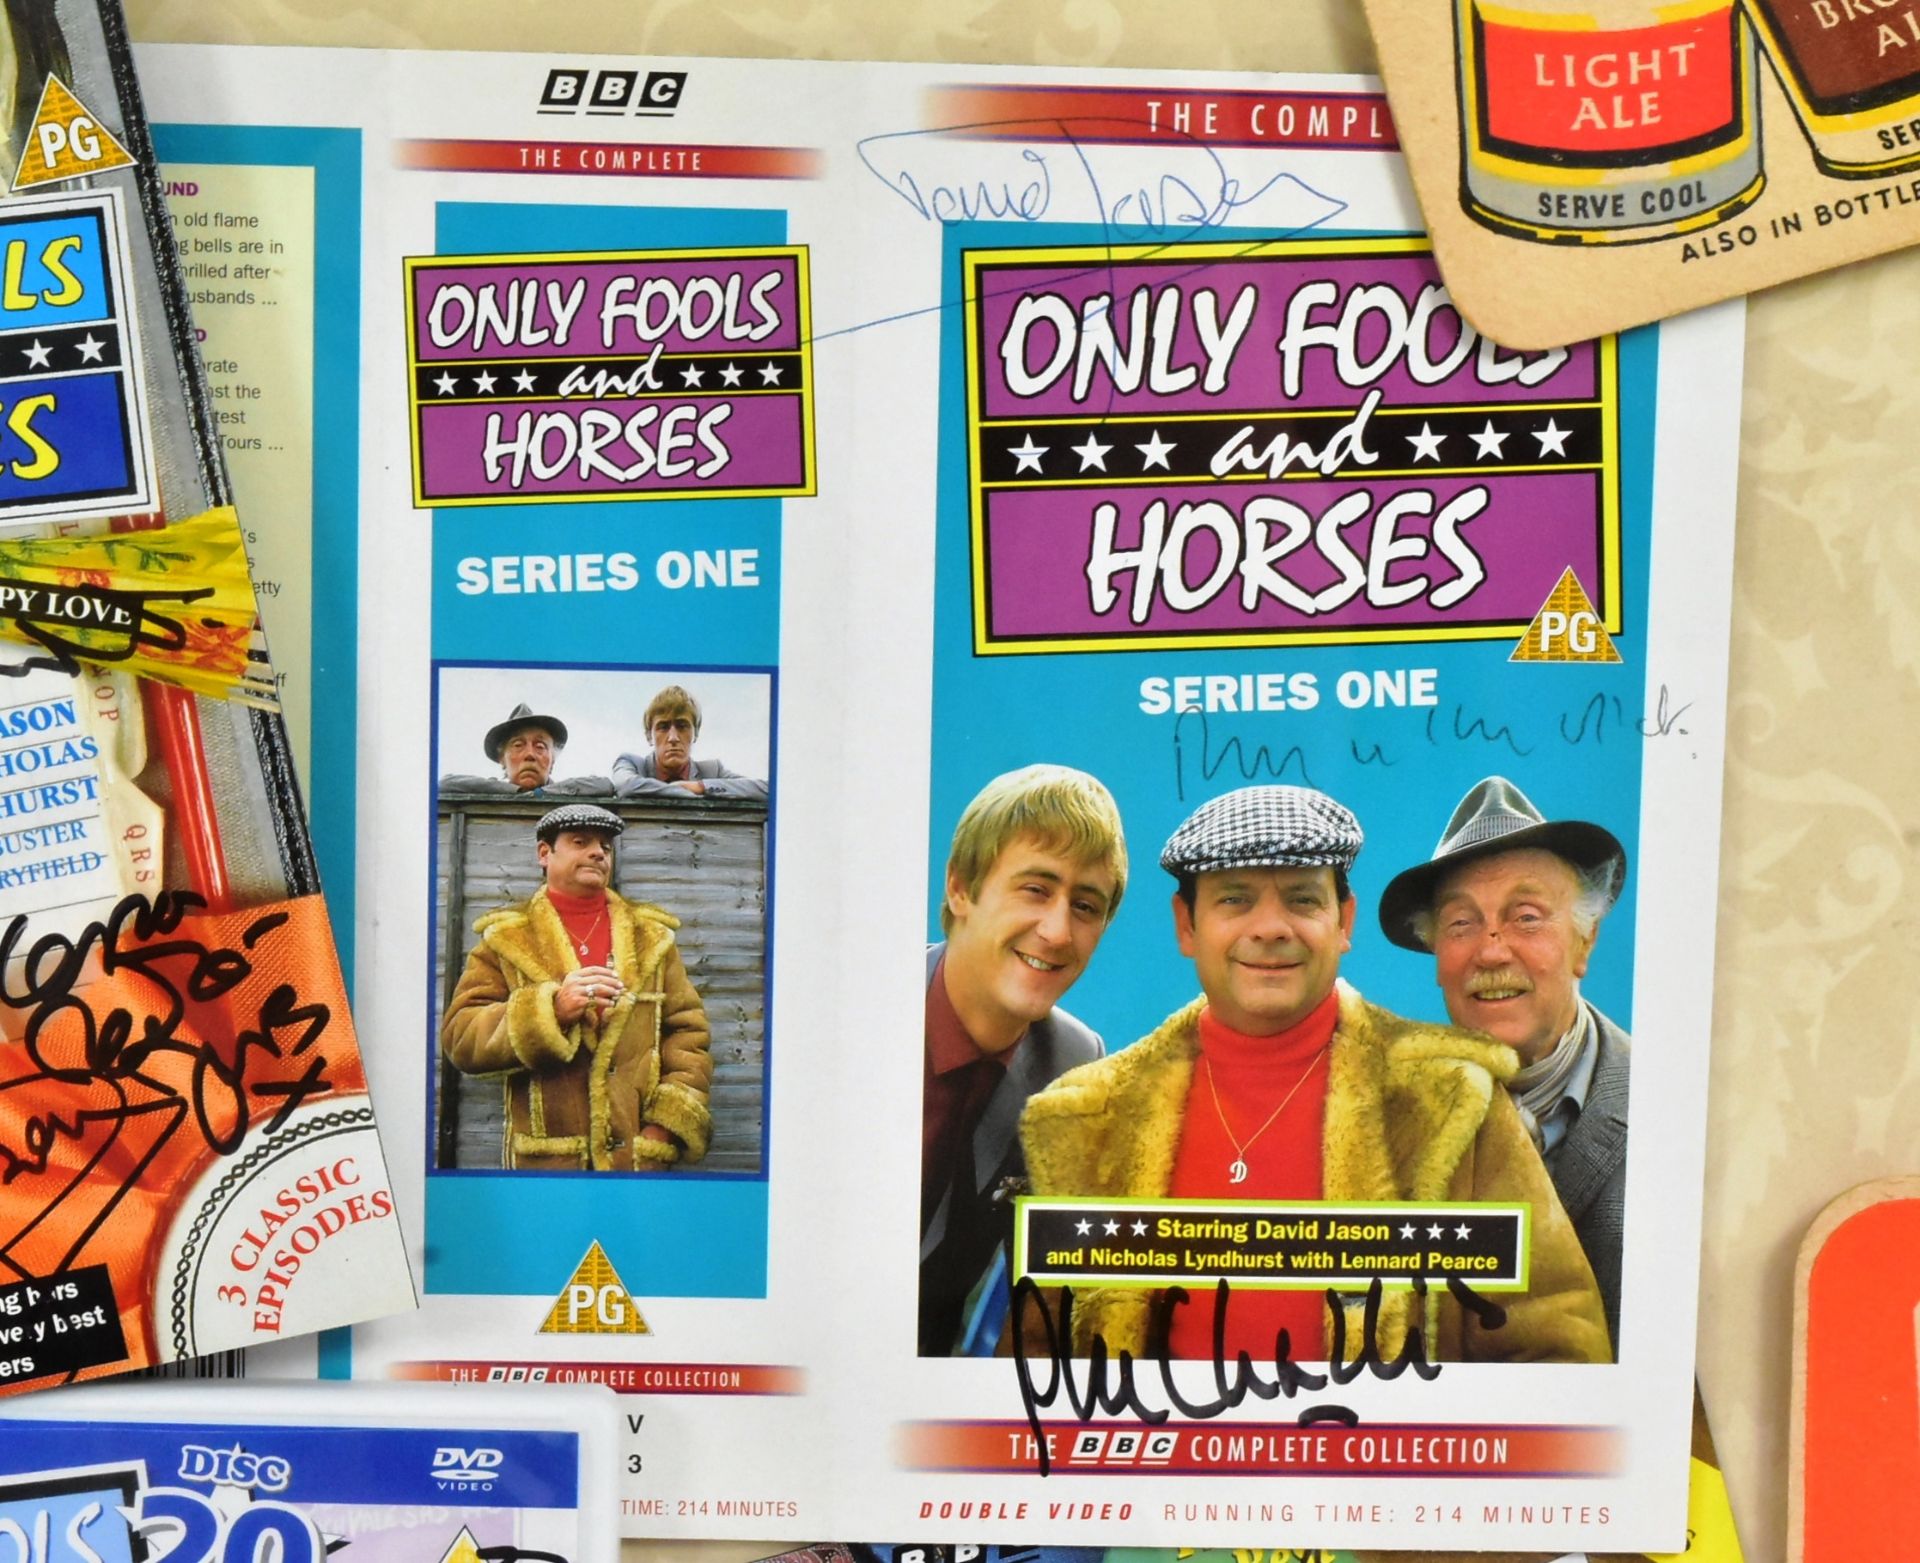 ONLY FOOLS & HORSES - CAST AUTOGRAPHED DISPLAY - Image 2 of 5